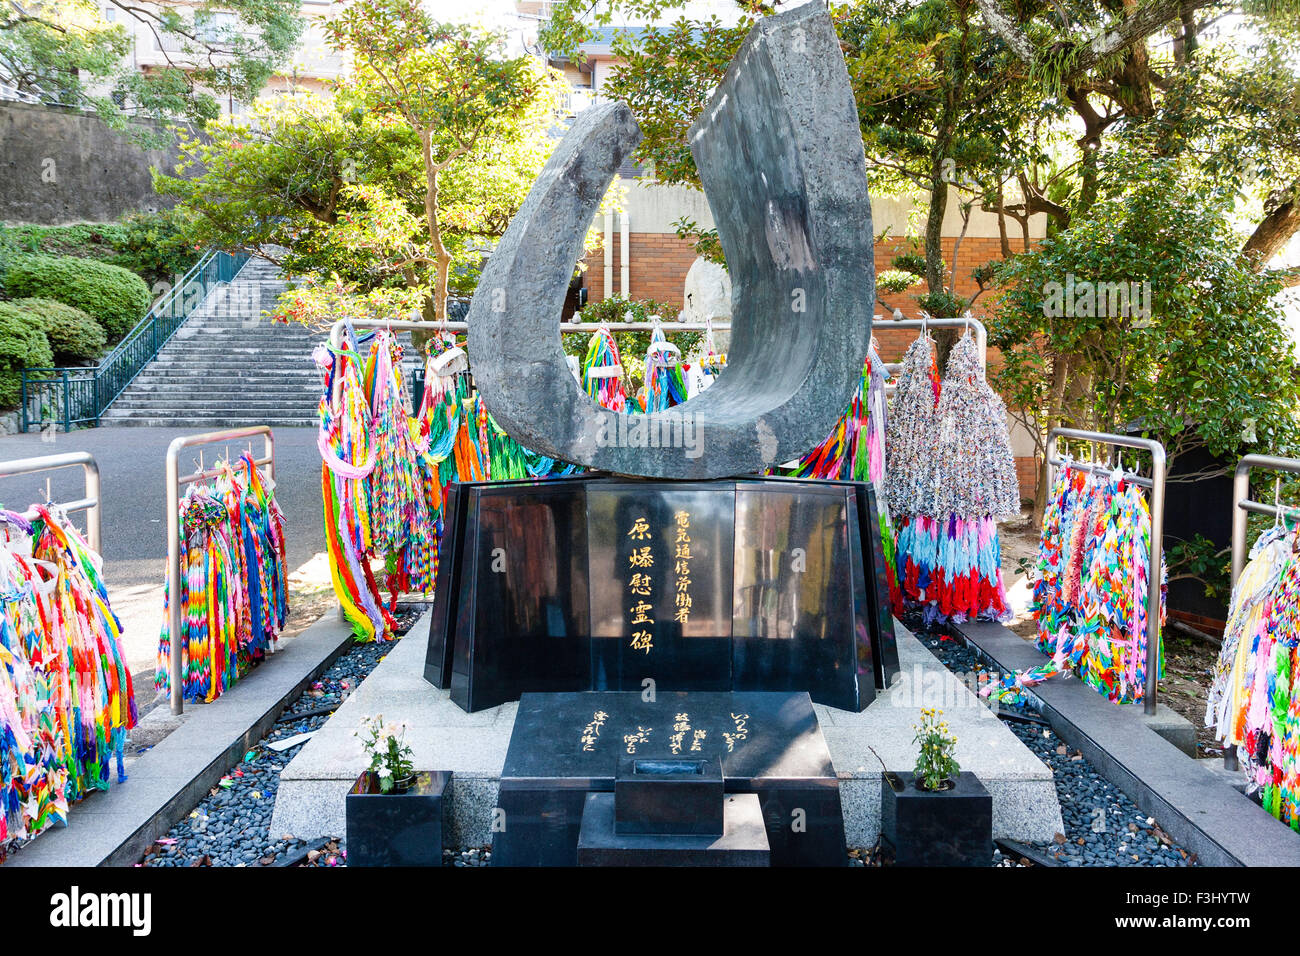 Nagasaki, the atomic bomb peace park. Paper cranes on frames around a sculpture memorial to the dead. Bottled water left as offerings. Stock Photo